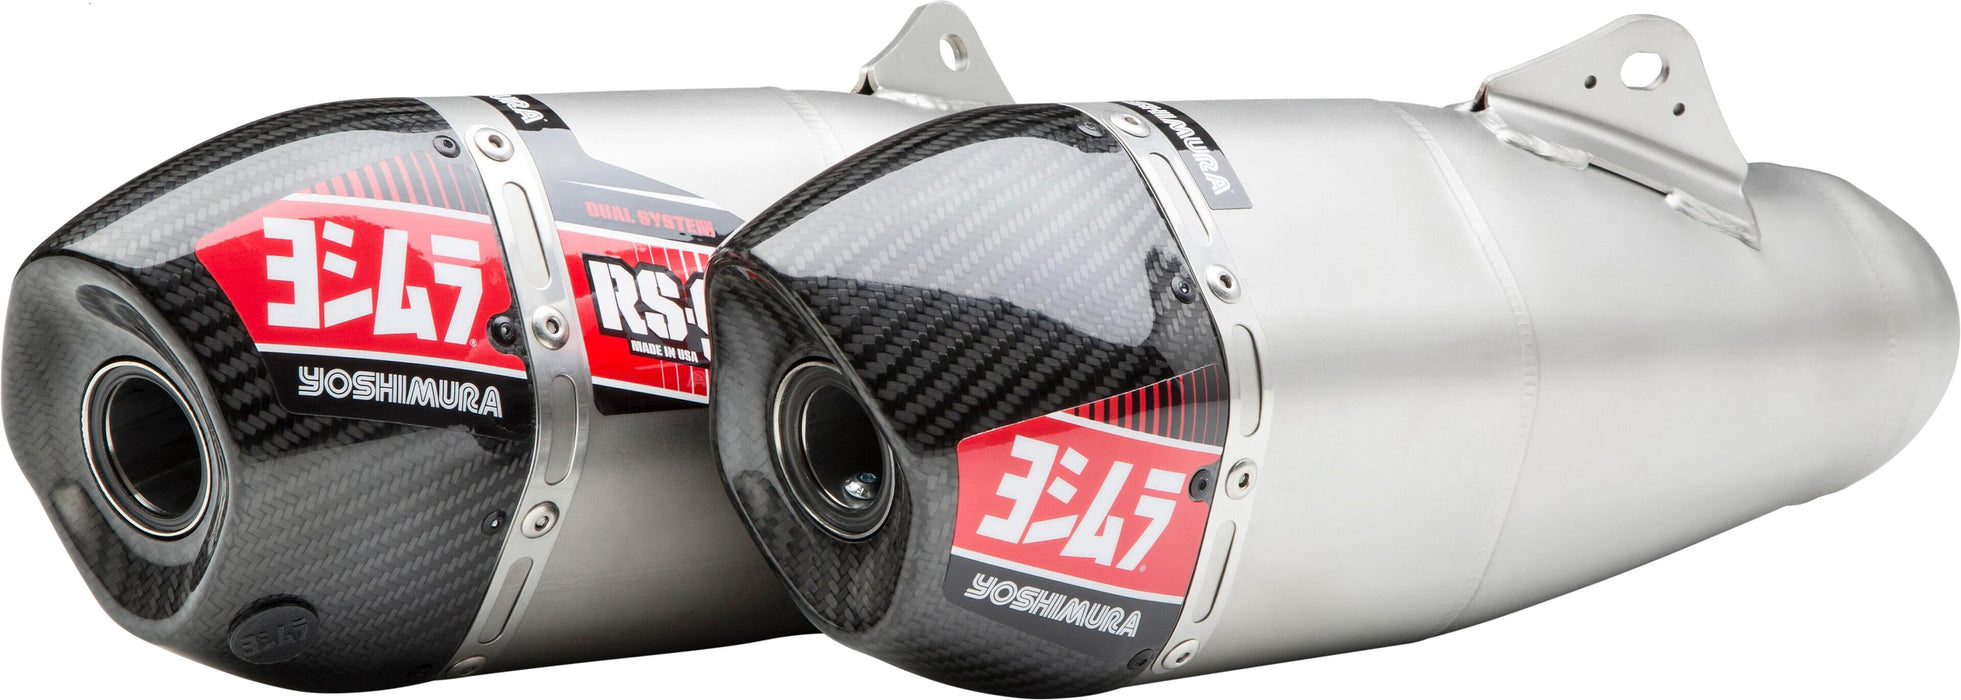 Yoshimura Rs-9D Slip-On Exhaust Dual (Signature/Stainless/Stainless/Carbon Fiber) For 20-21 Honda Crf250R 22844BR520